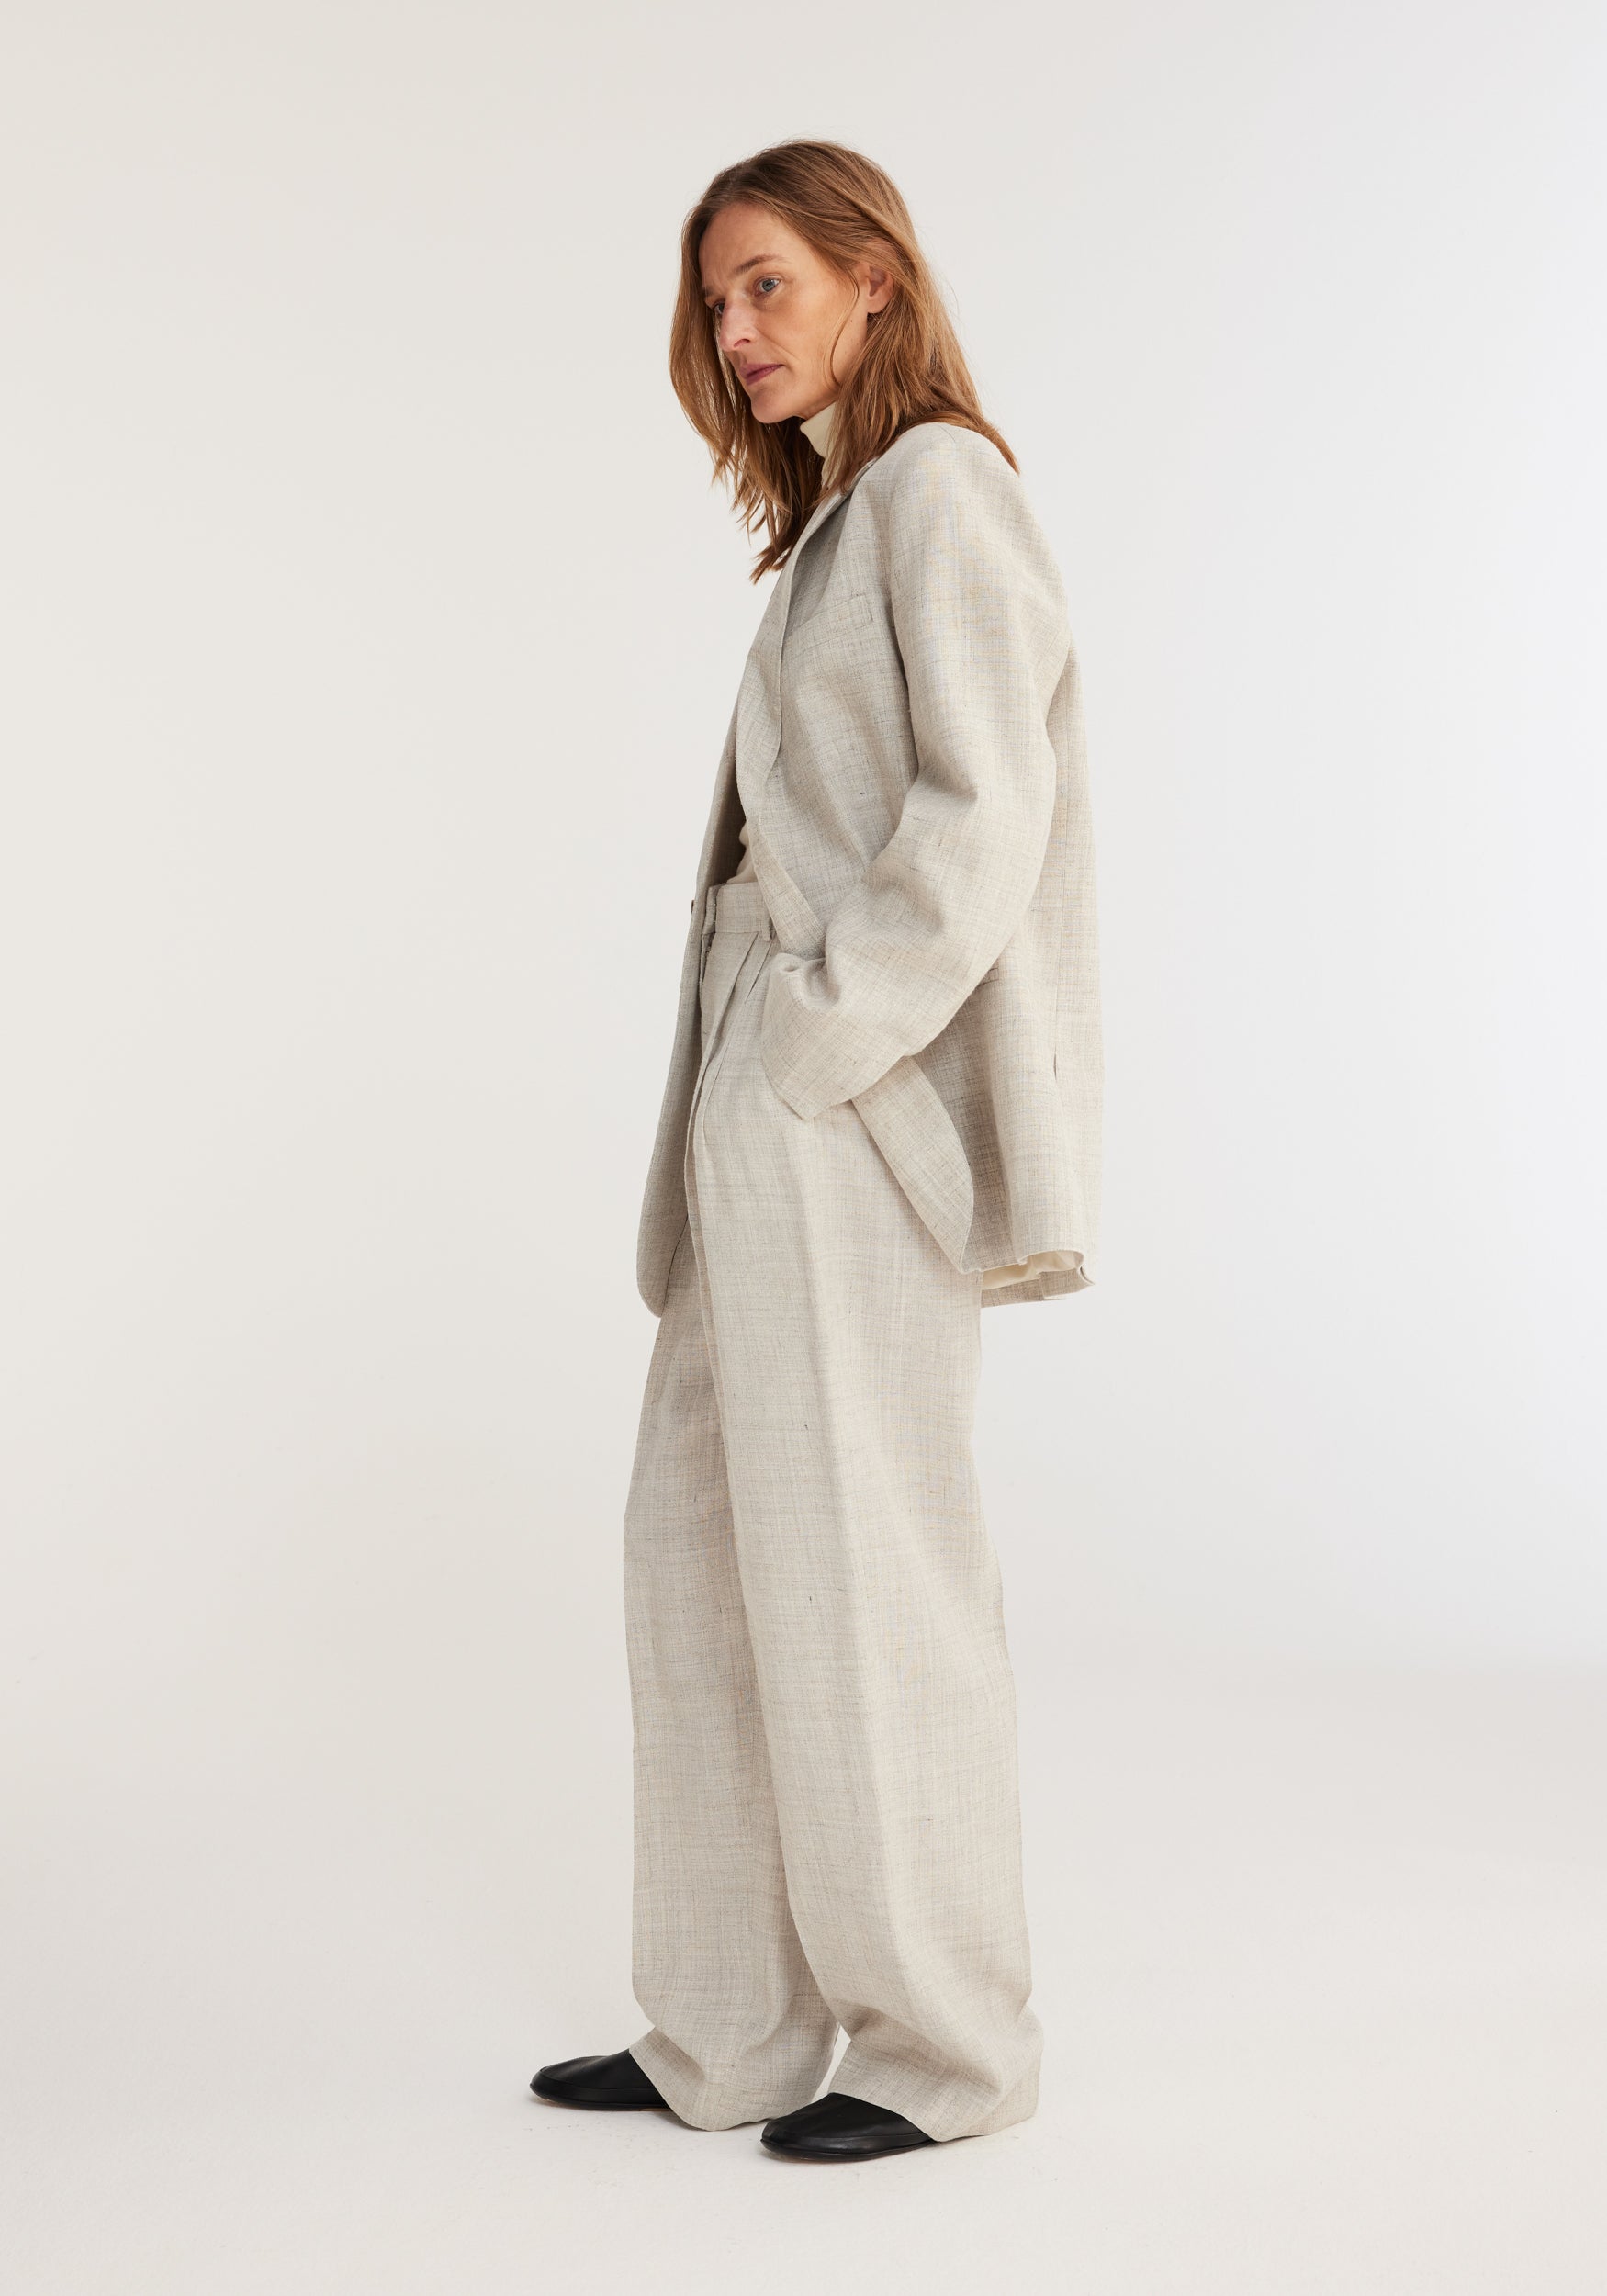 The Rohe Overlap Blazer in Stone Melange available at The New Trend Australia